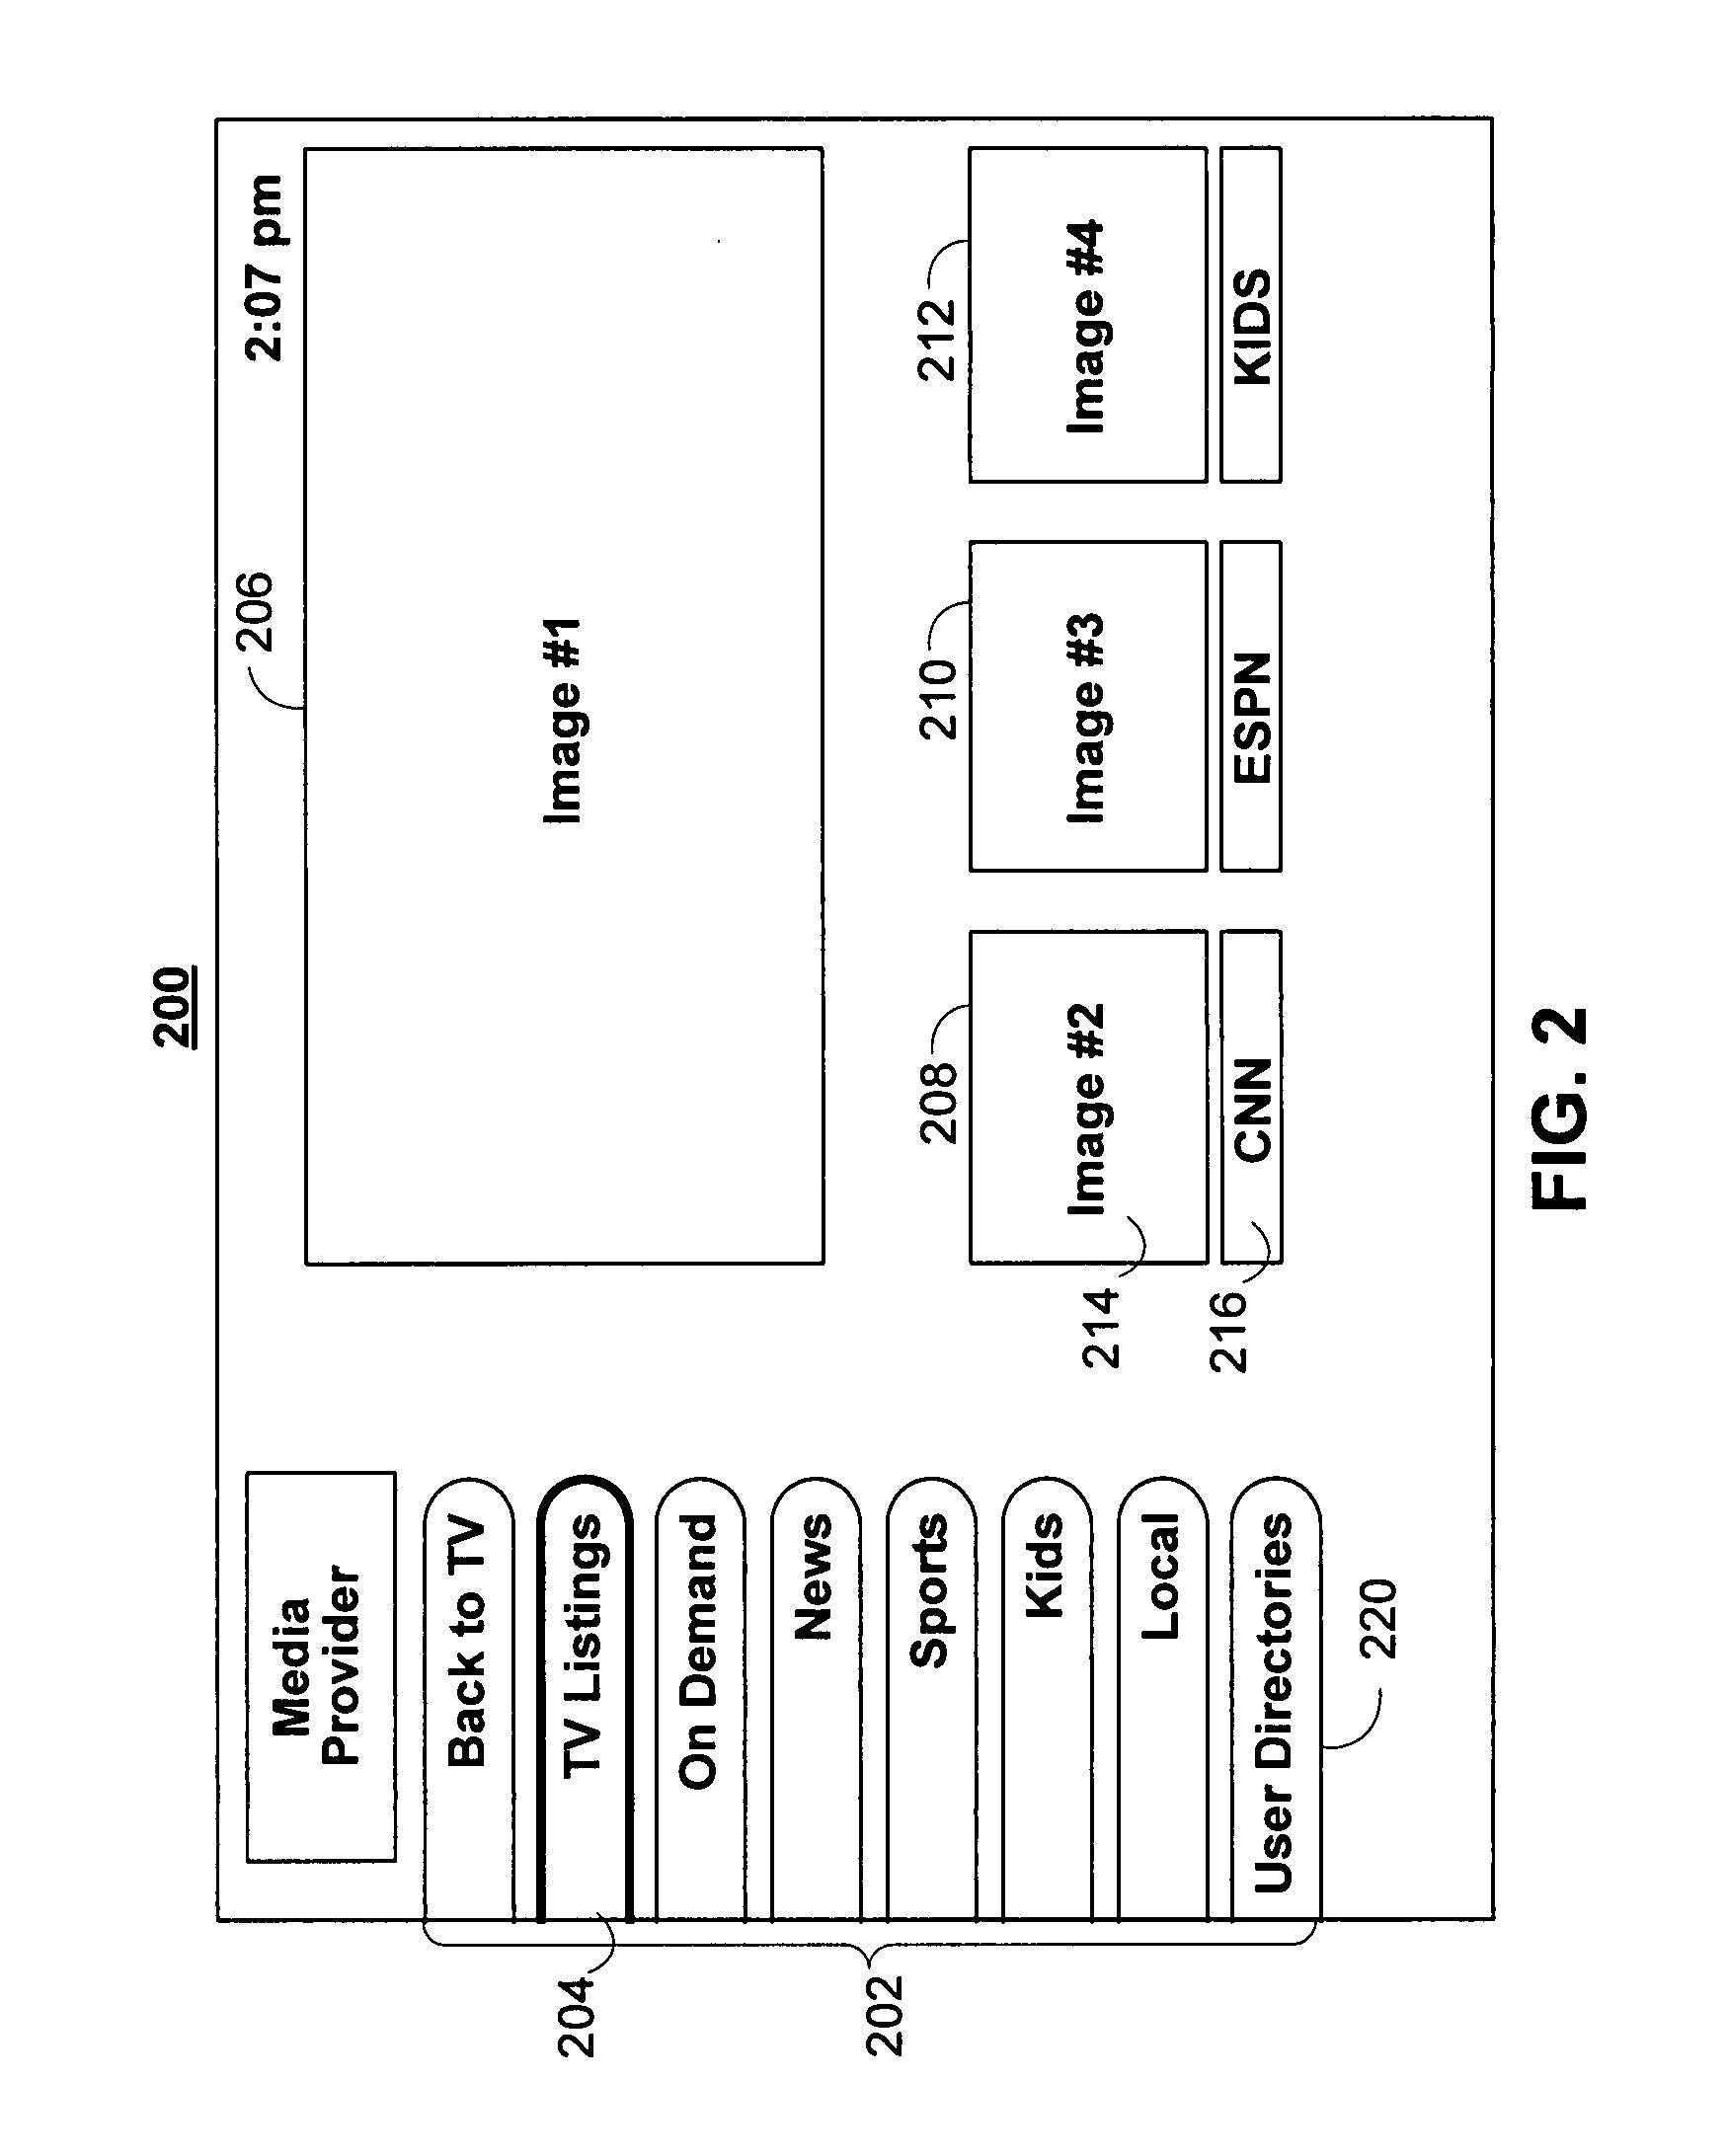 Systems and methods for mirroring and transcoding media content